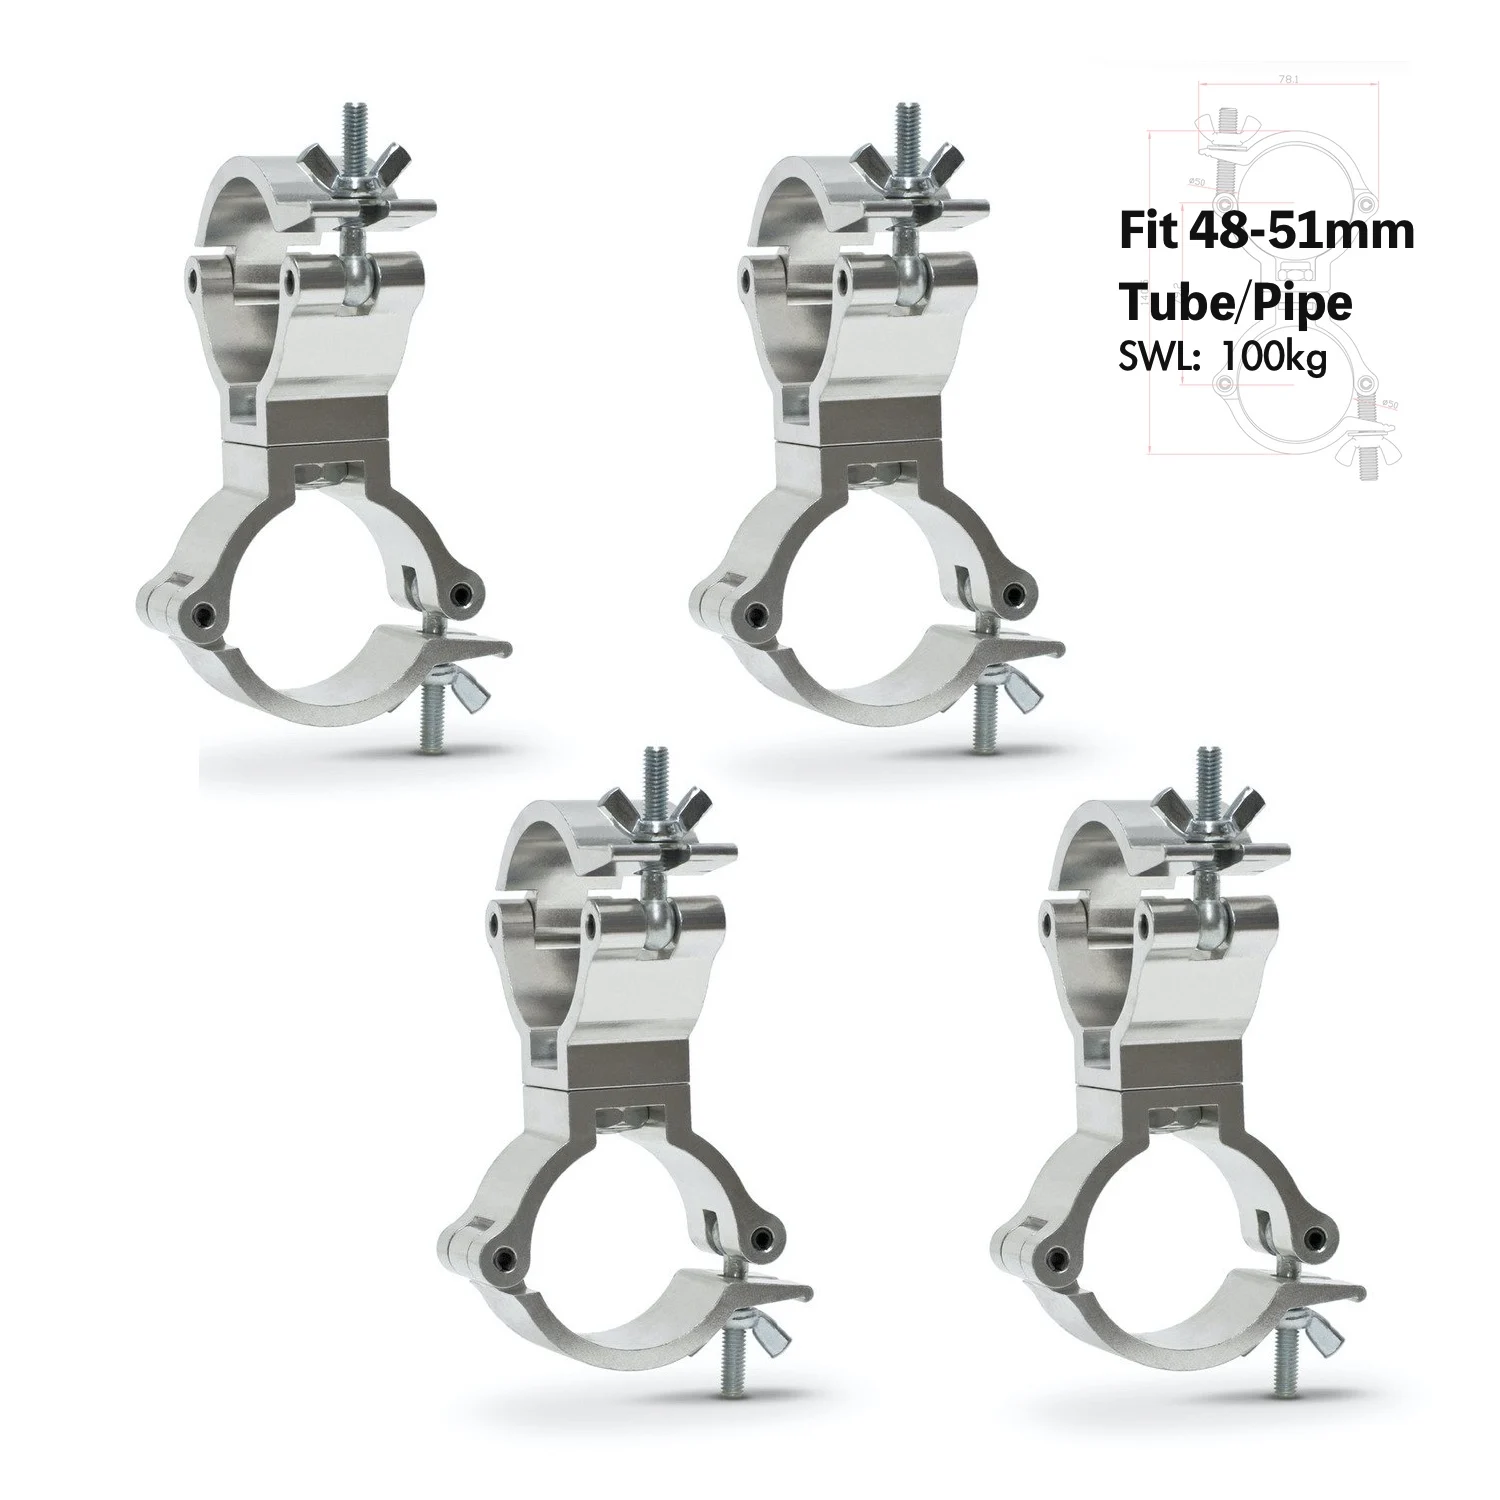 4 Pack Stage Light Clamp Dual JR Swivel Clamp 220 LB./ 100 KG Load Capacity Aluminum Truss Clamp for 48-51mm Tubing